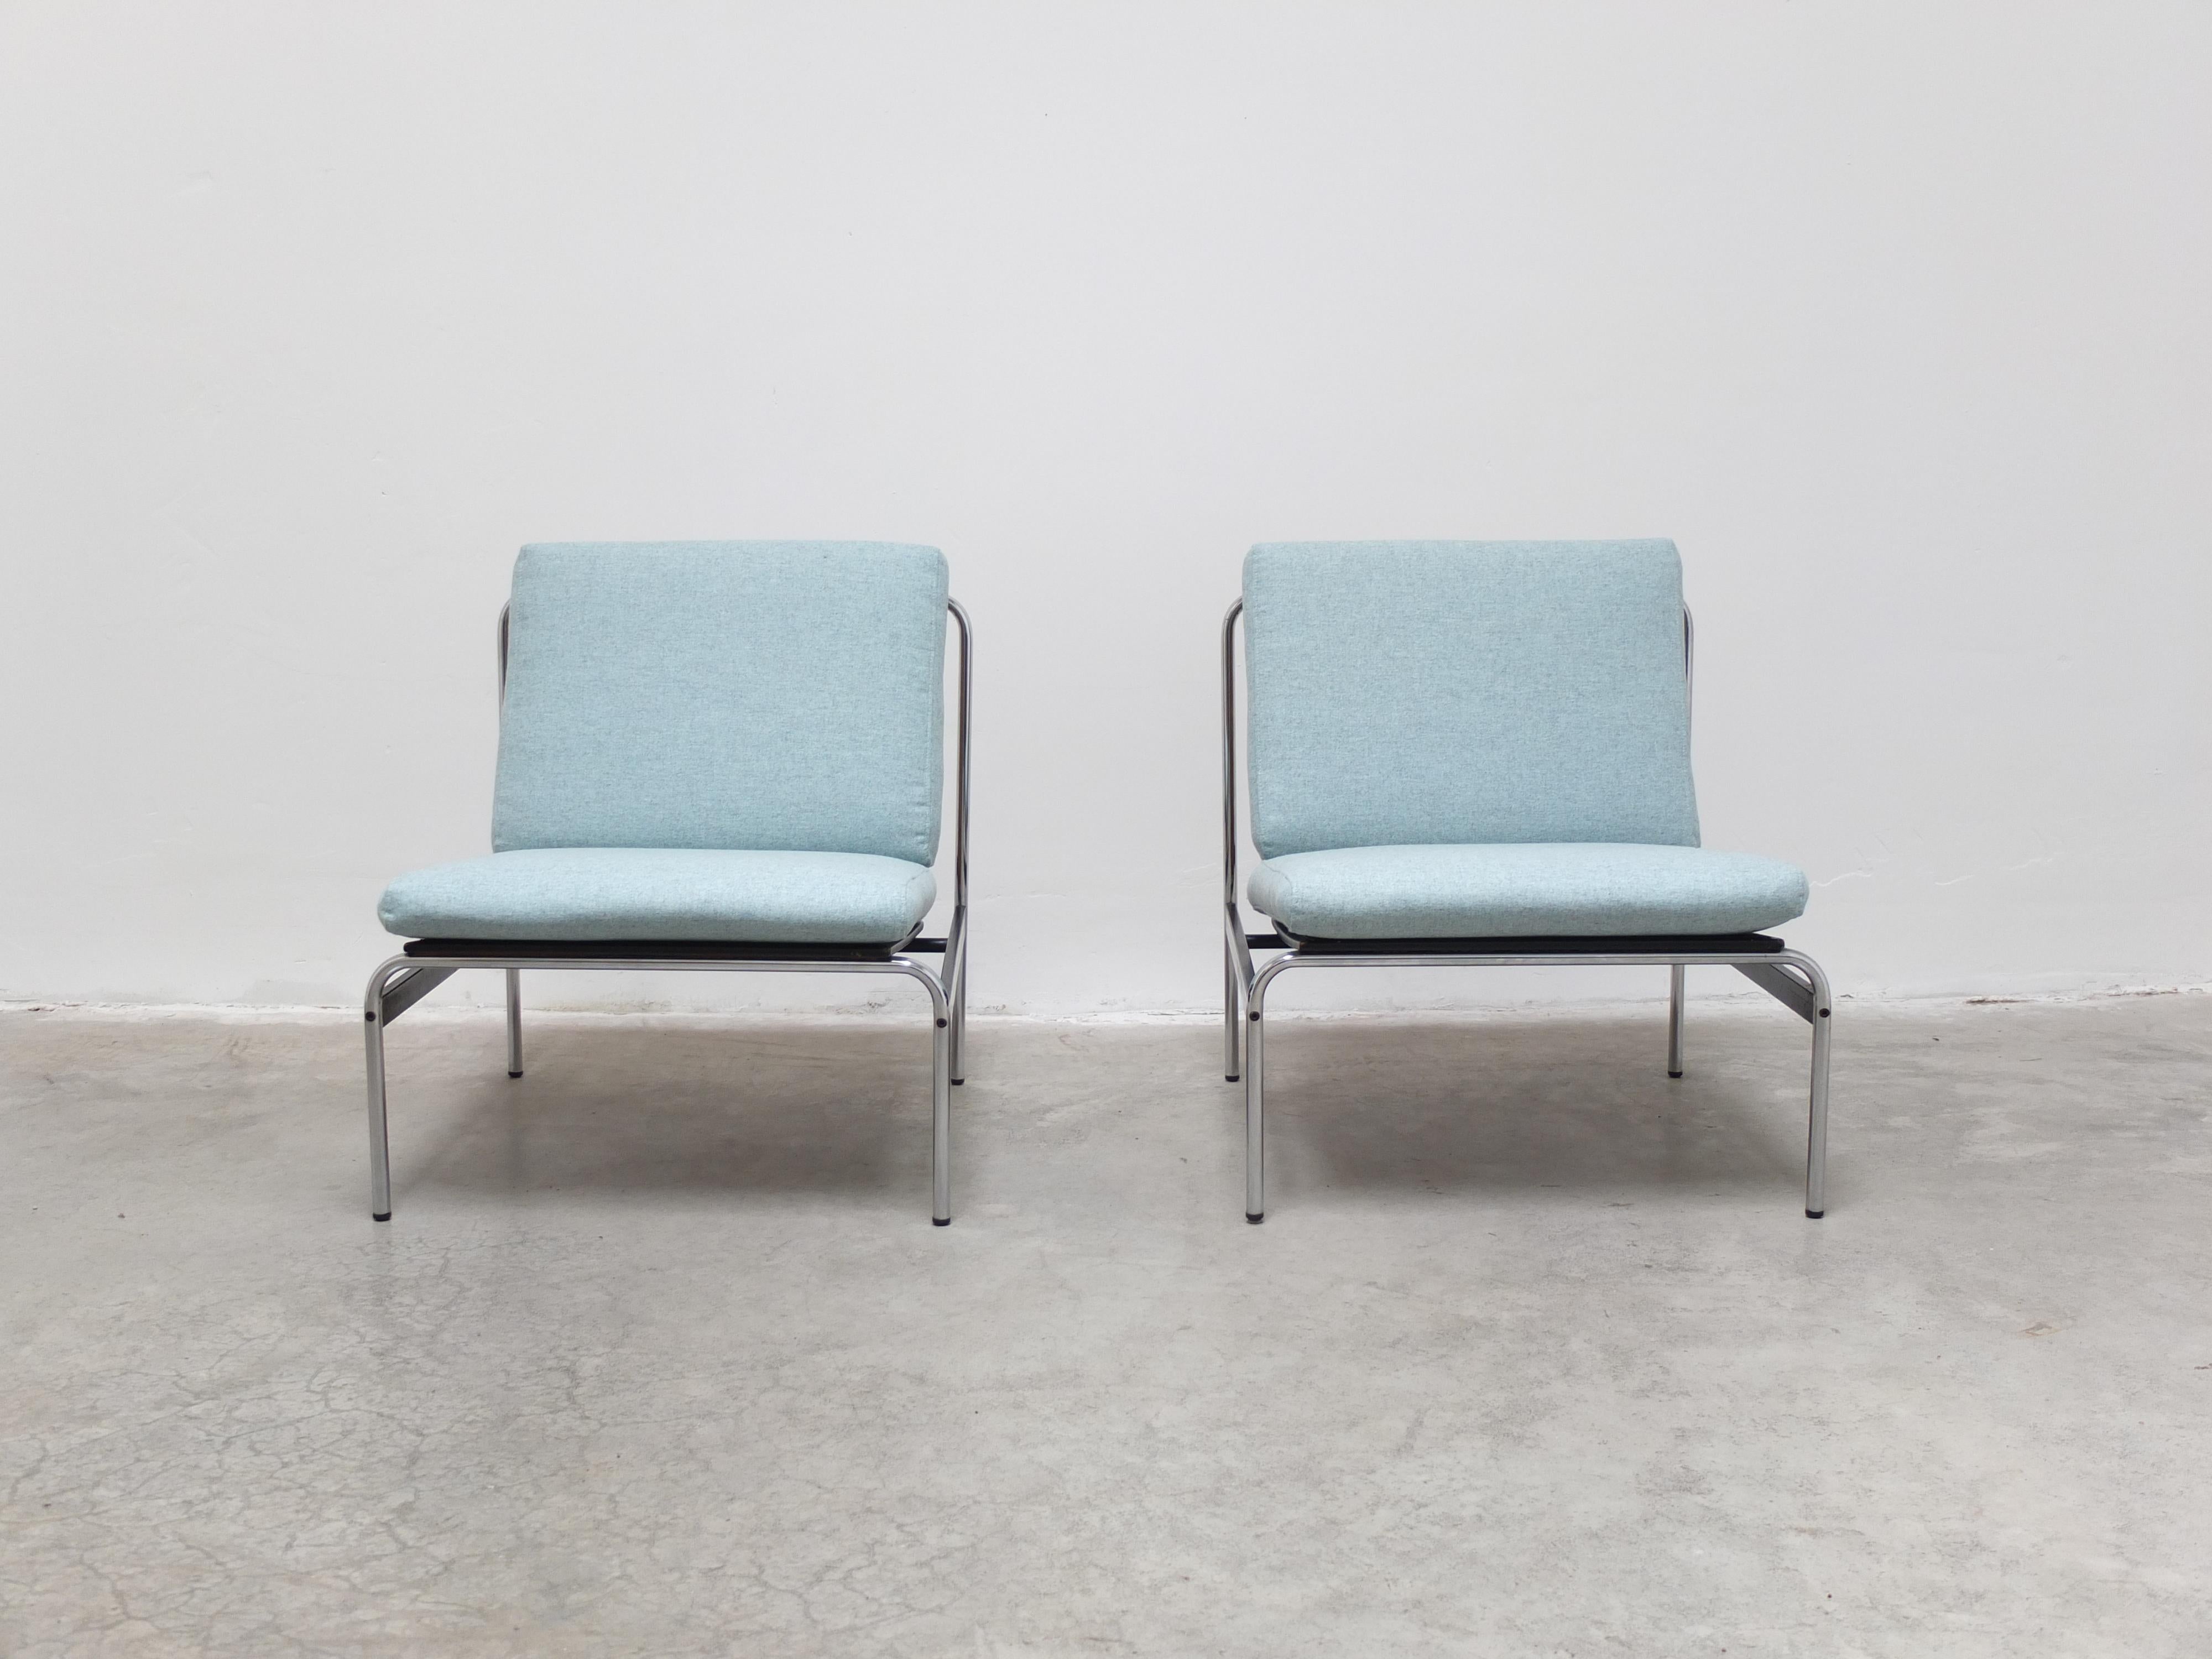 Fantastic pair of modernist lounge chairs produced in The Netherlands during the 1960s. This design is very similar to some of Kho Liang’s work for Artifort but until now I have not found any proof of this yet which makes them even more interesting.